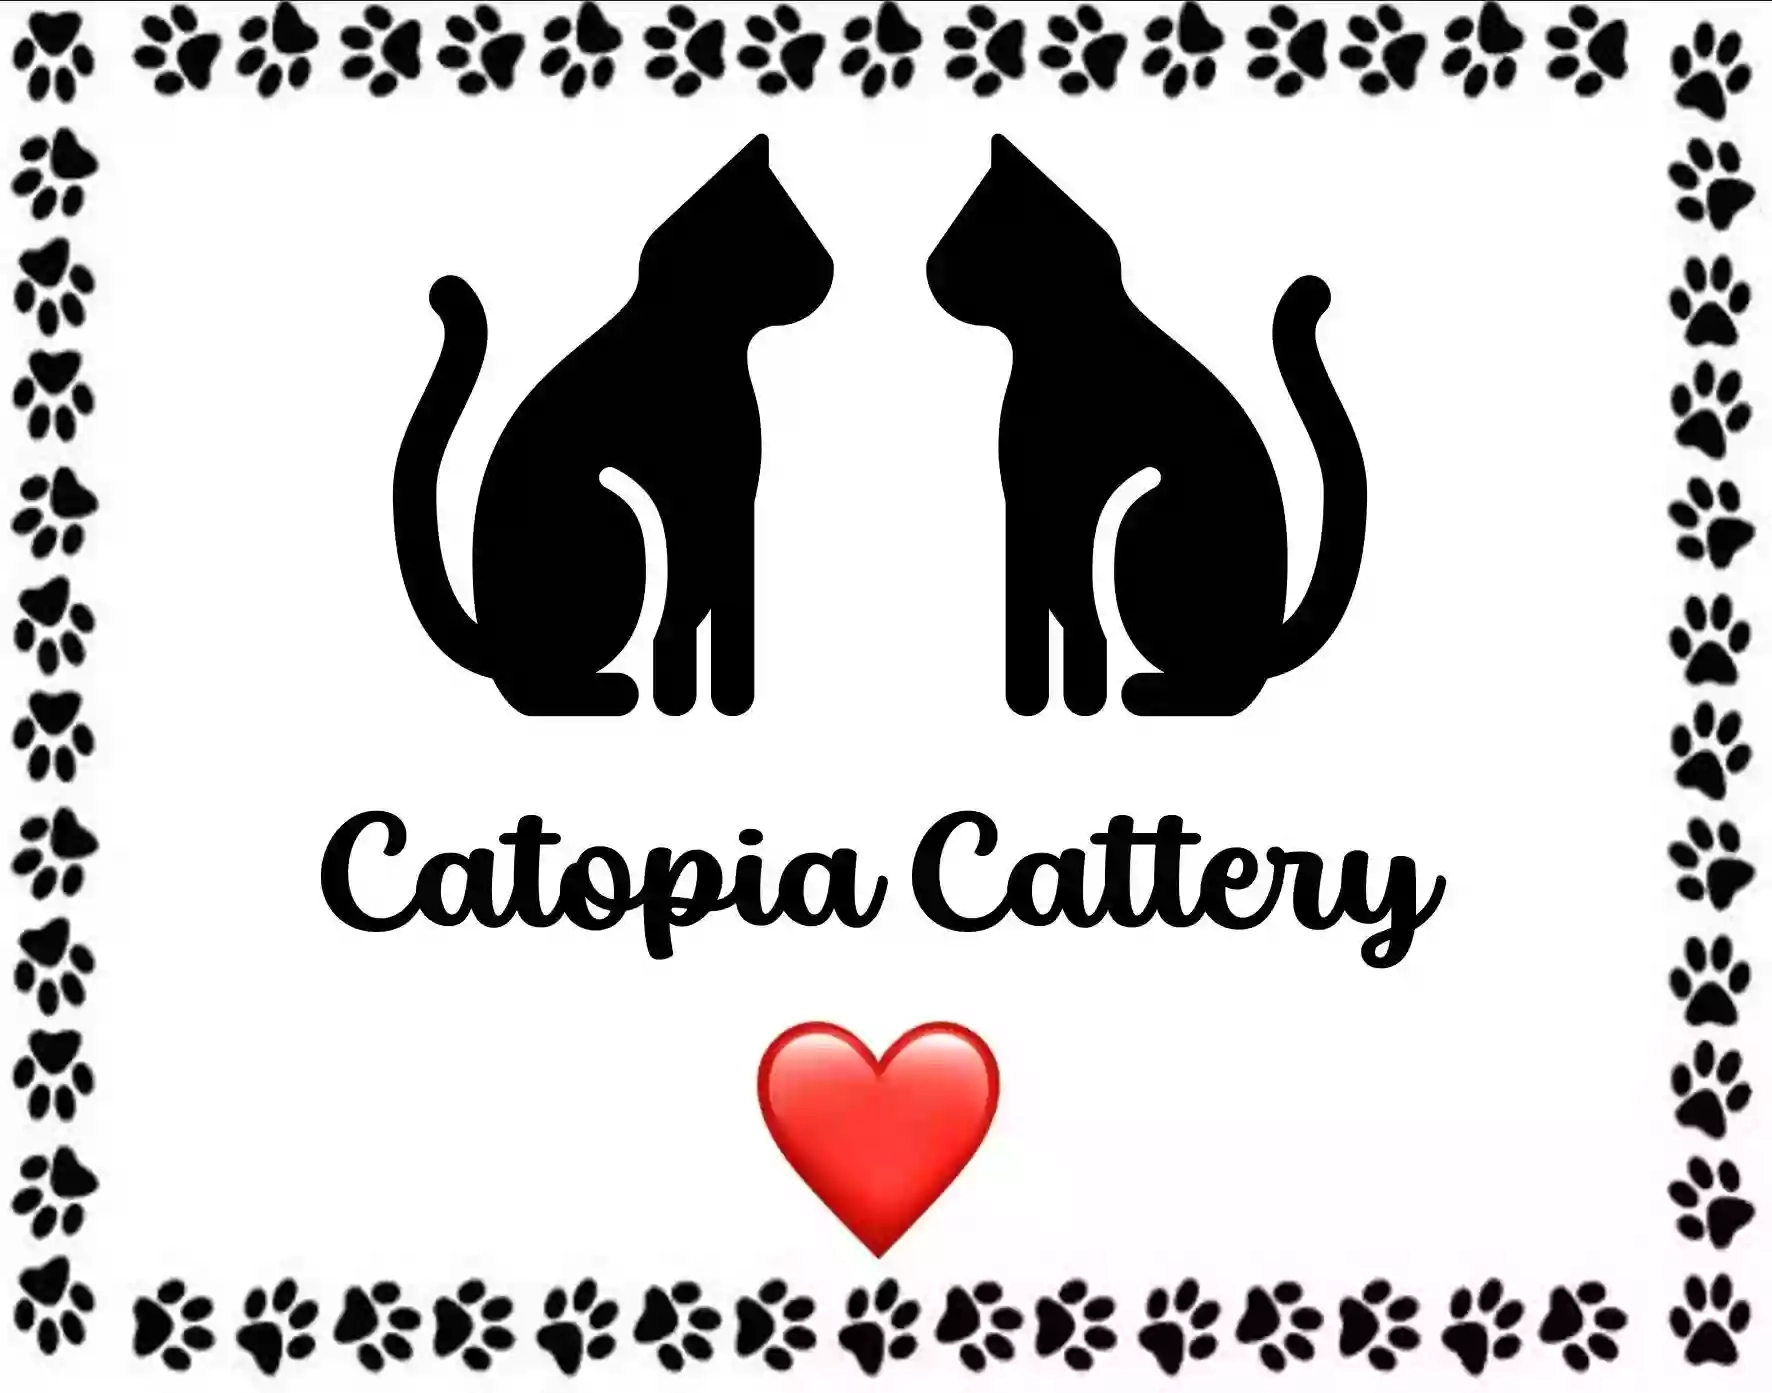 Catopia Deluxe Cattery